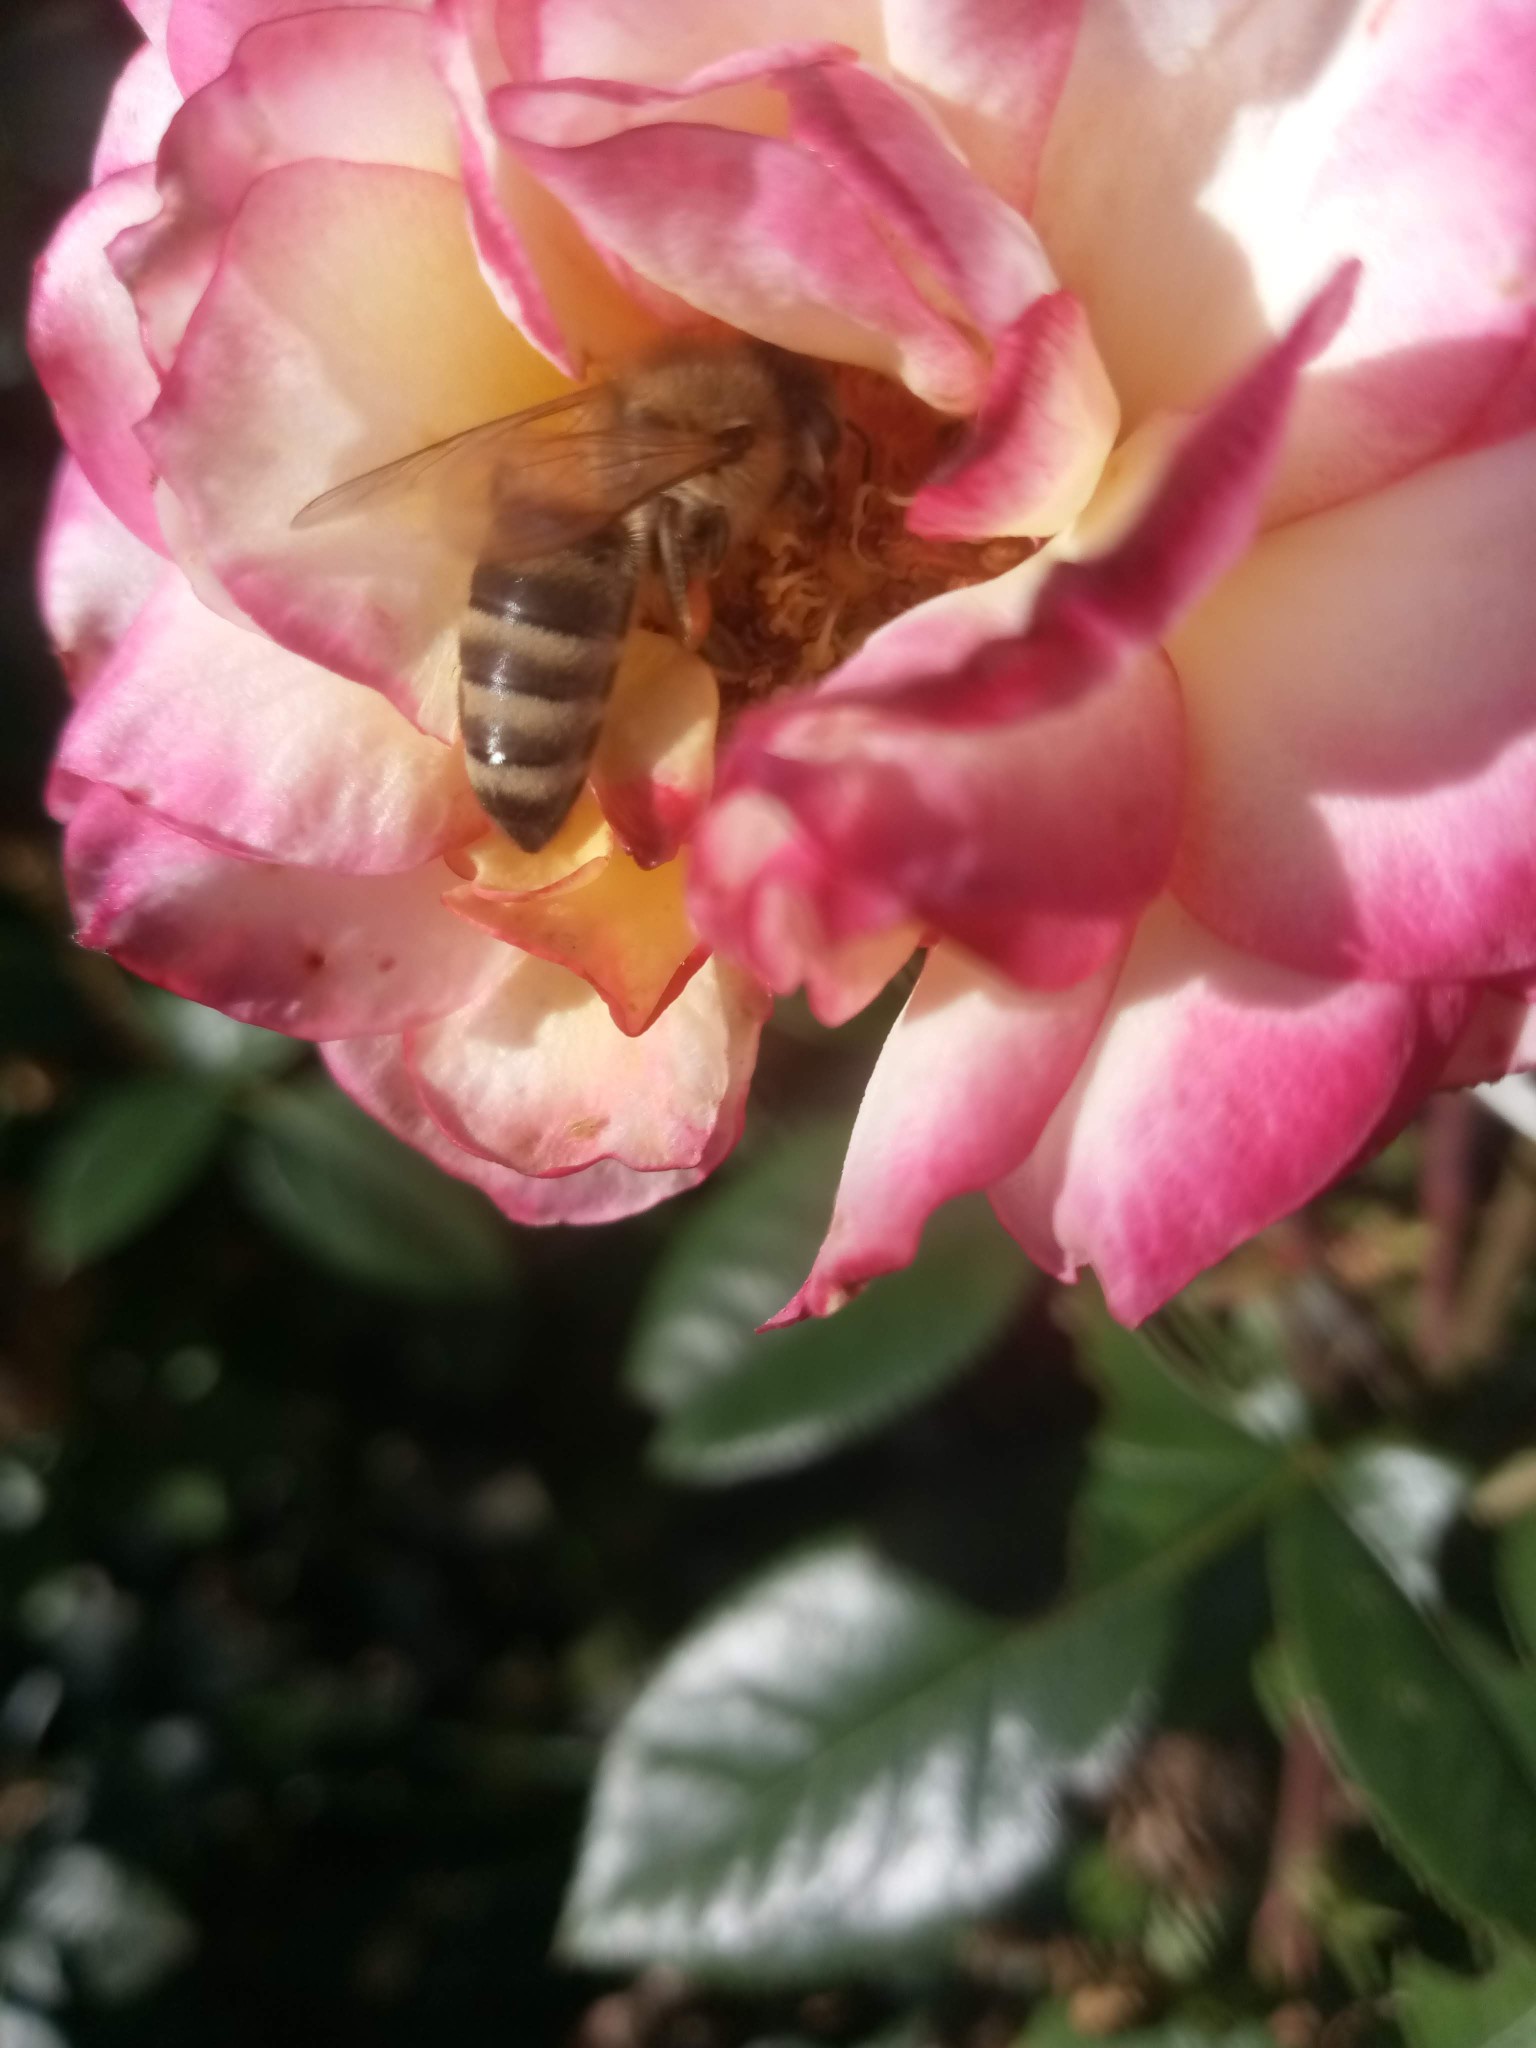 Bee on a rose photo 